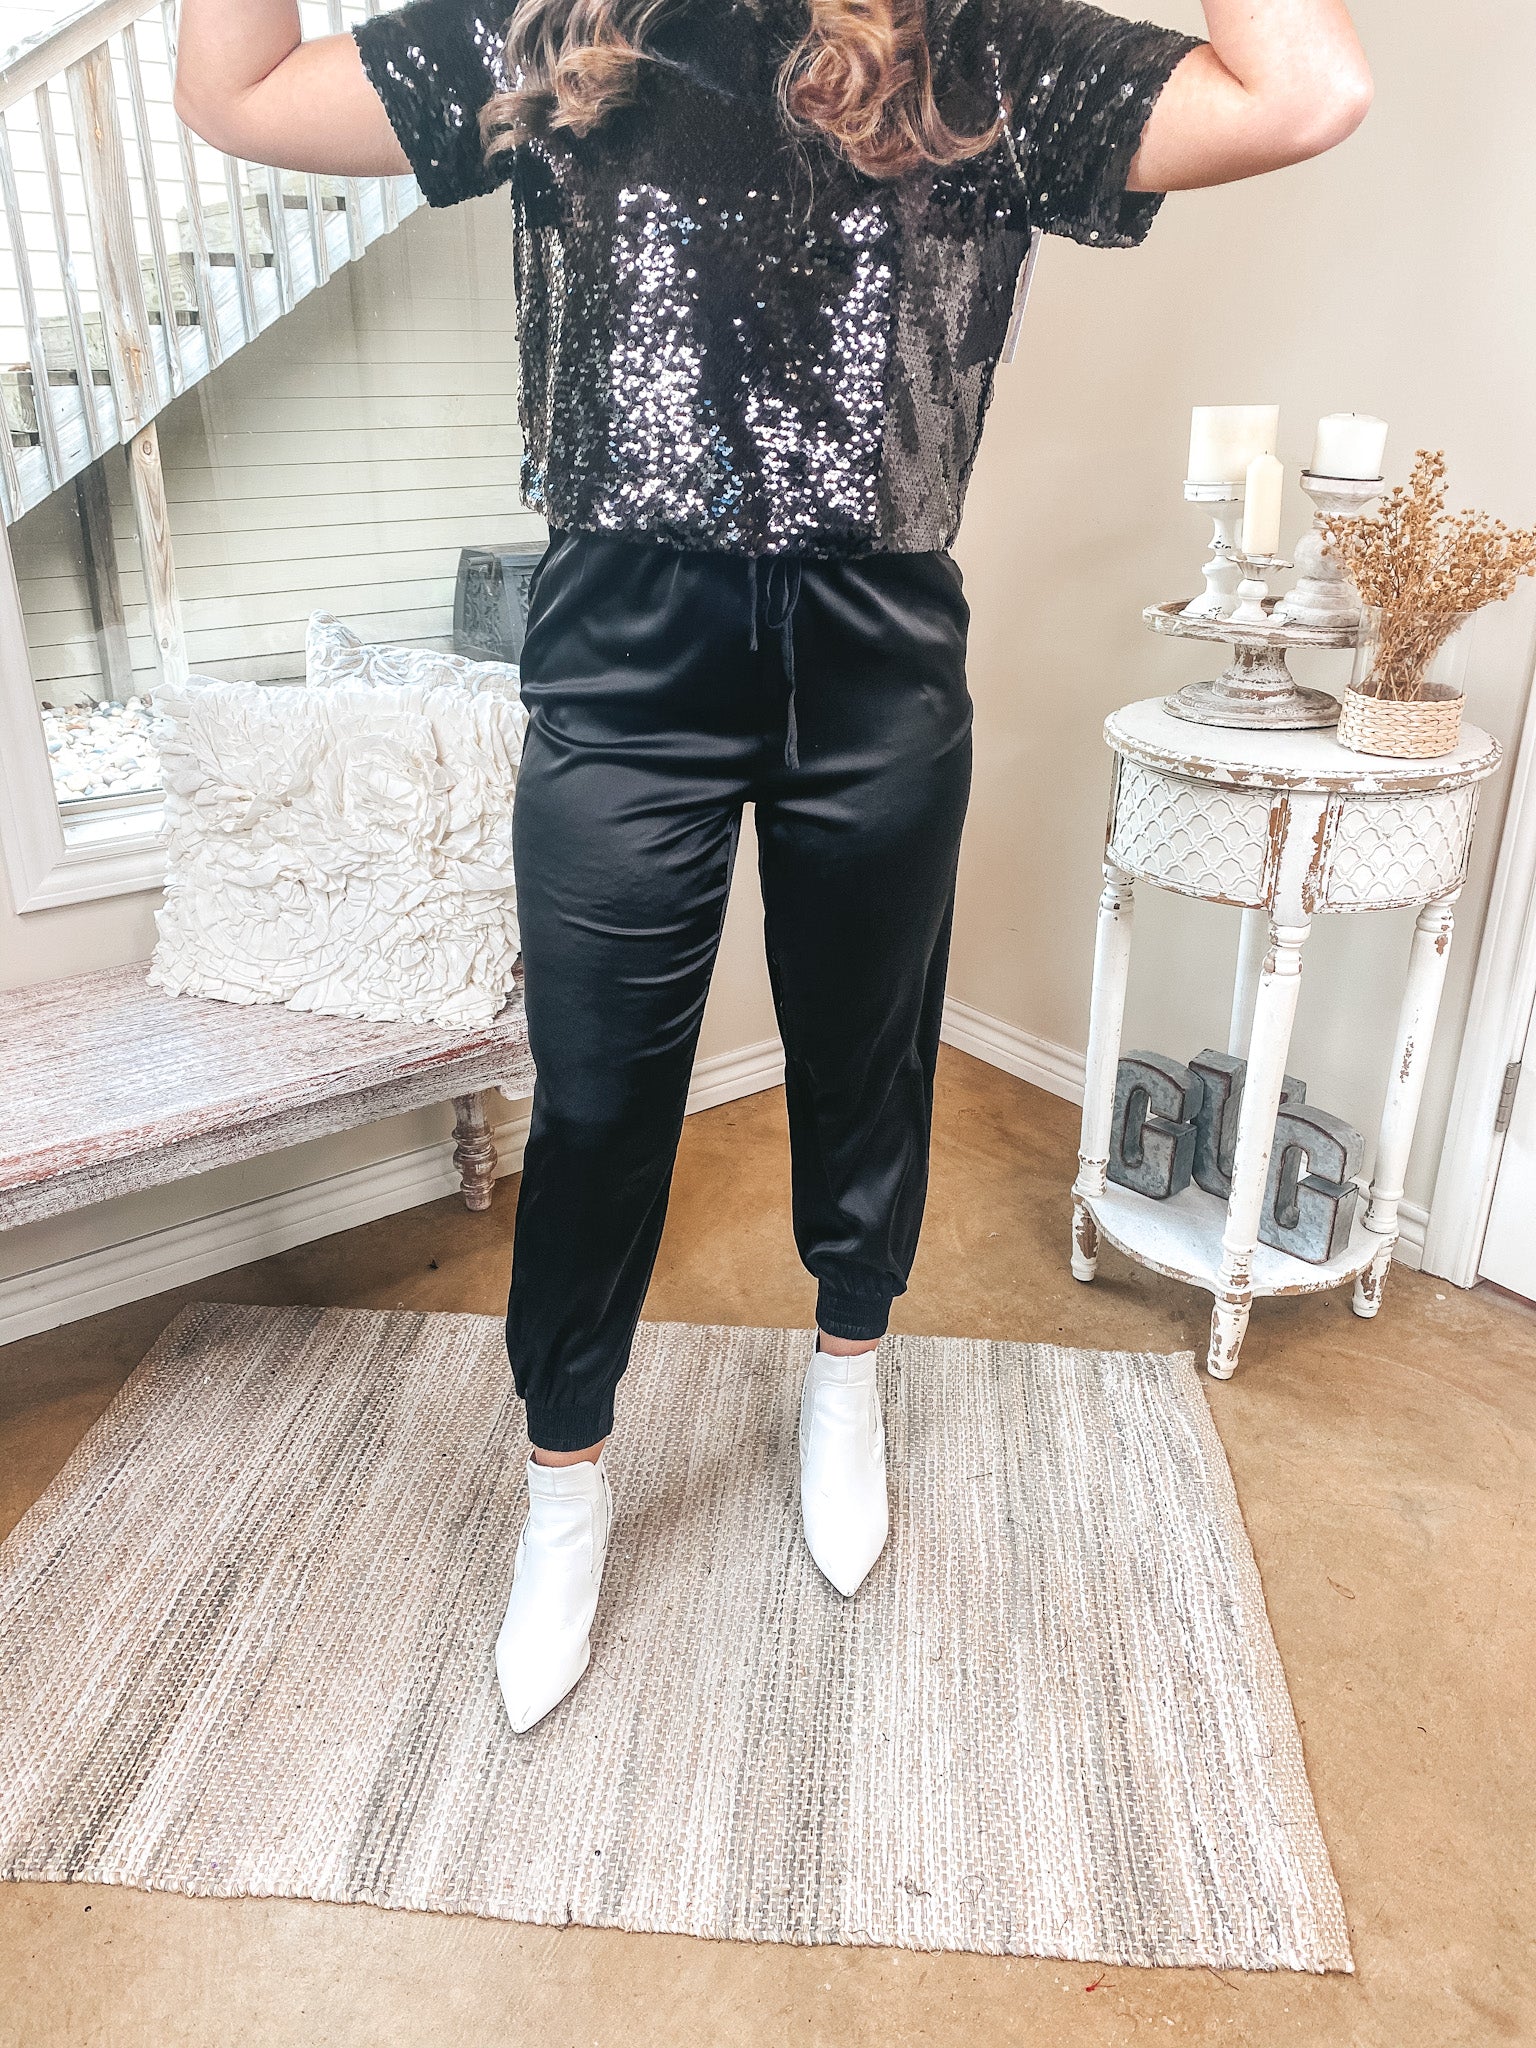 Sassy in Satin  Drawstring Satin Joggers in Black - Giddy Up Glamour Boutique